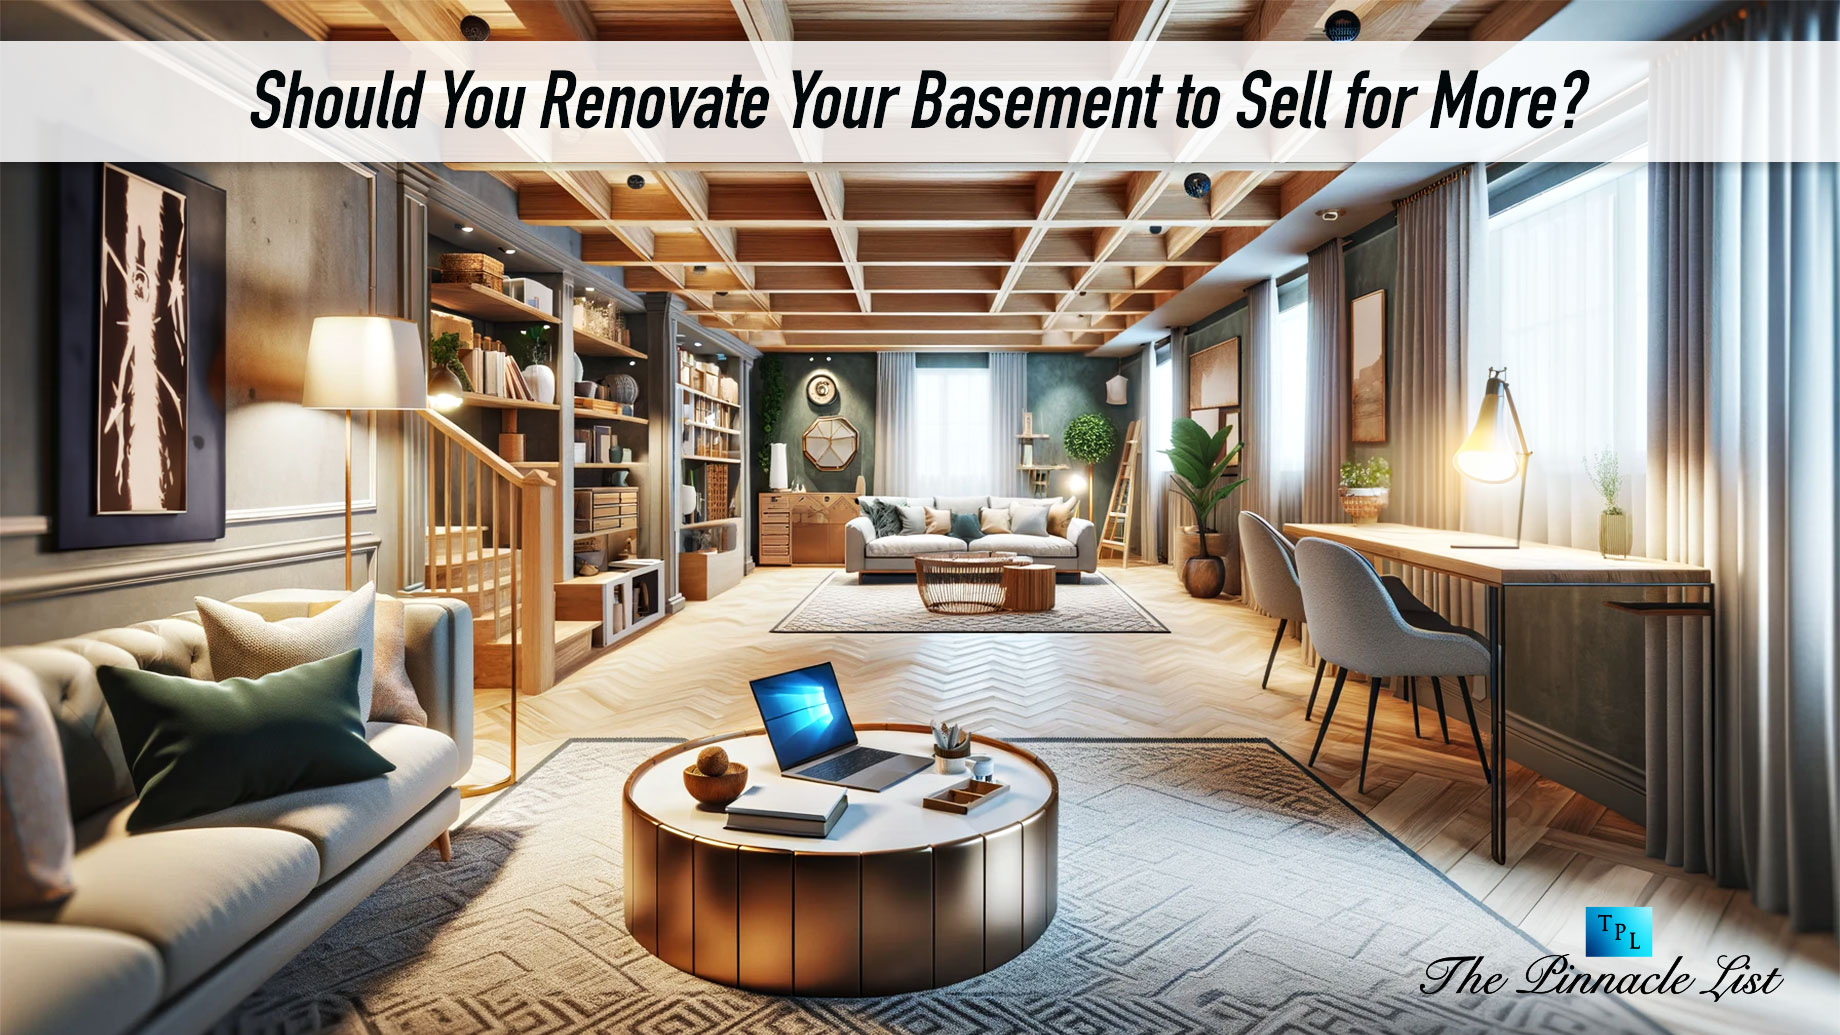 Should You Renovate Your Basement to Sell for More?